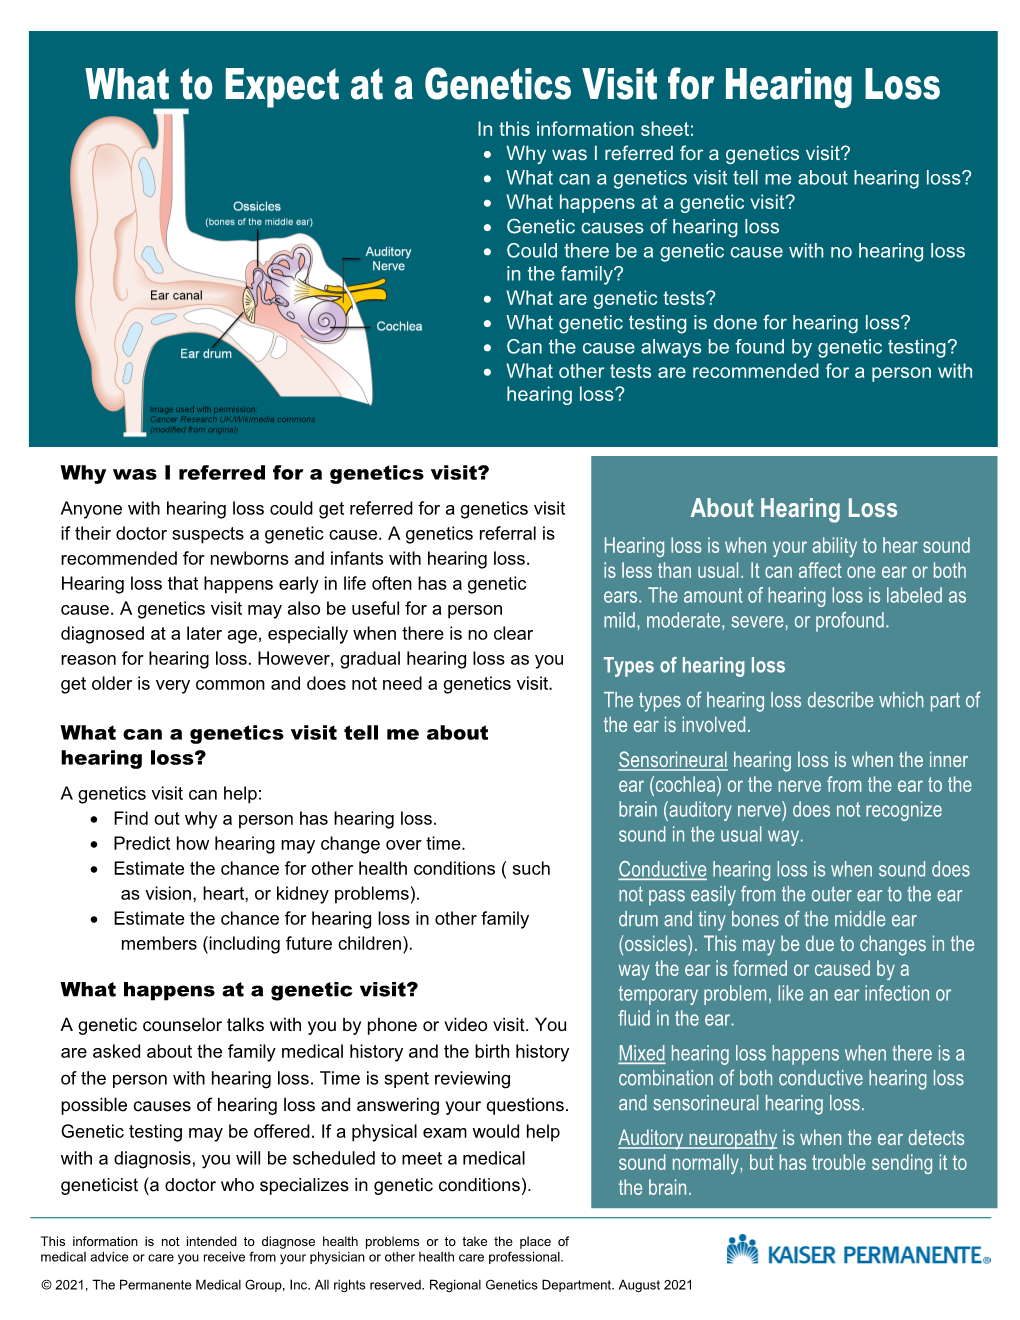 What to Expect at a Genetics Visit for Hearing Loss